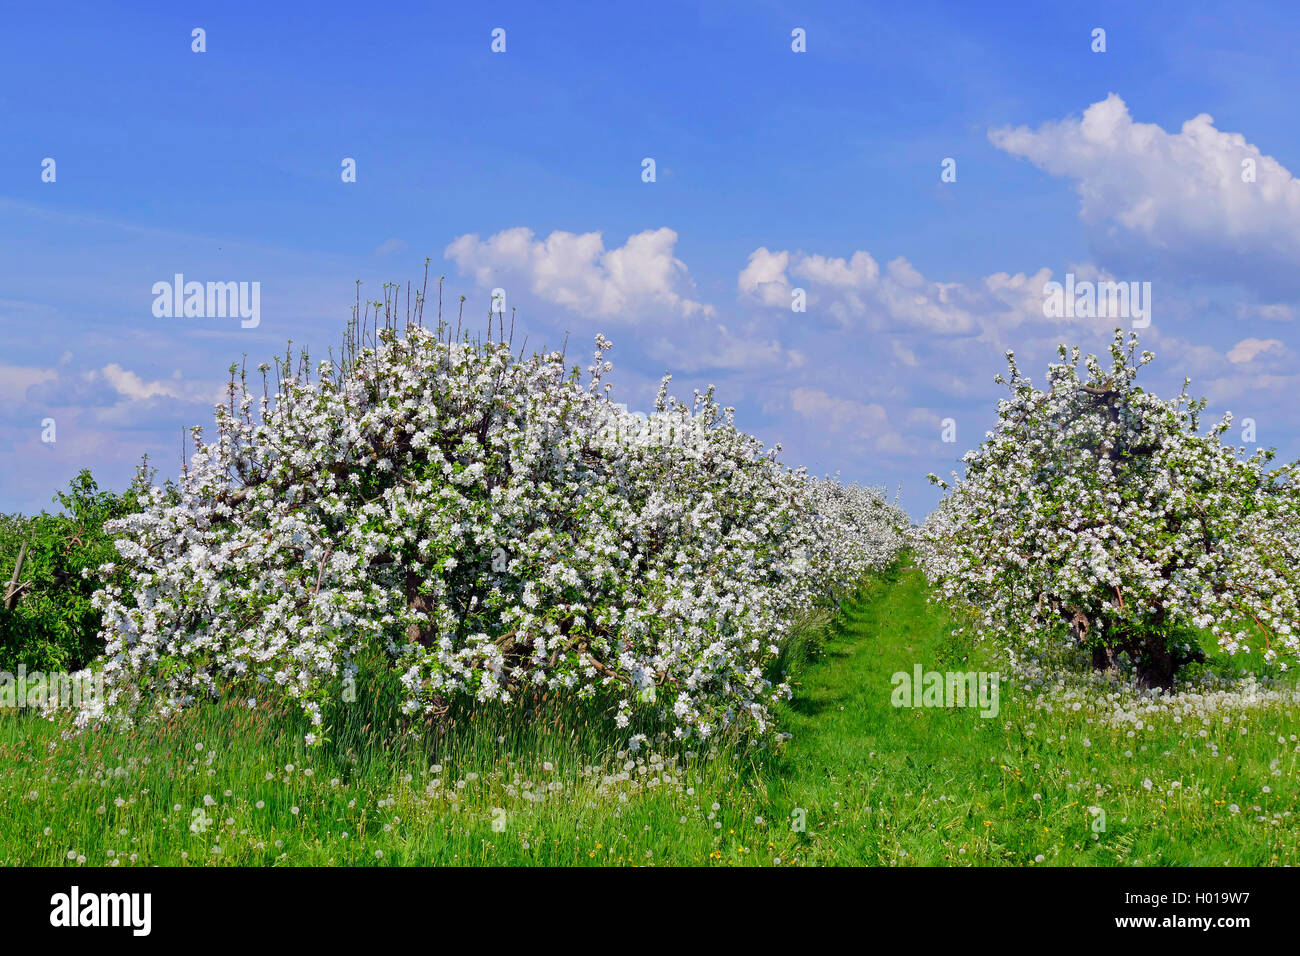 apple tree (Malus domestica), blooming apple trees in Altes Land at Jork, Germany, Lower Saxony, Altes Land Stock Photo